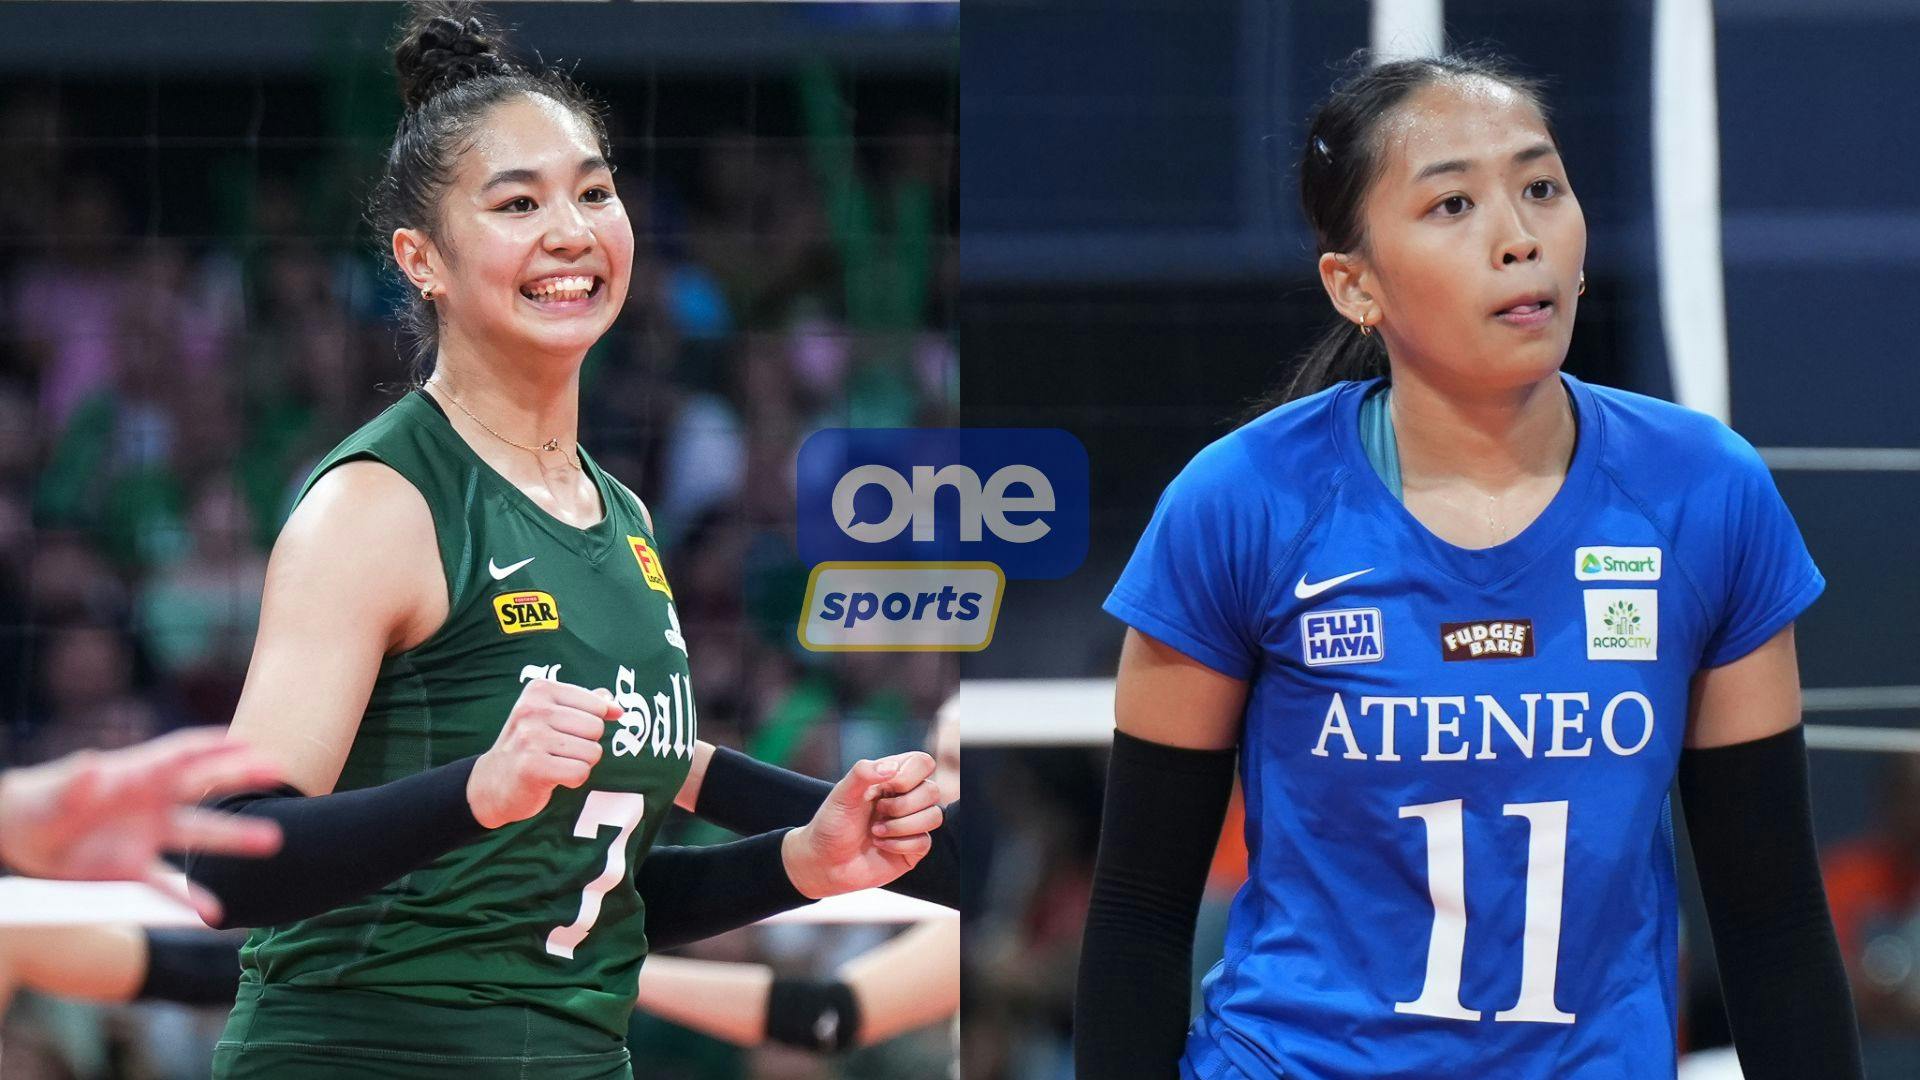 UAAP schedule: With Final Four bonuses on the line, the DLSU-Ateneo rivalry heats up anew in Season 86